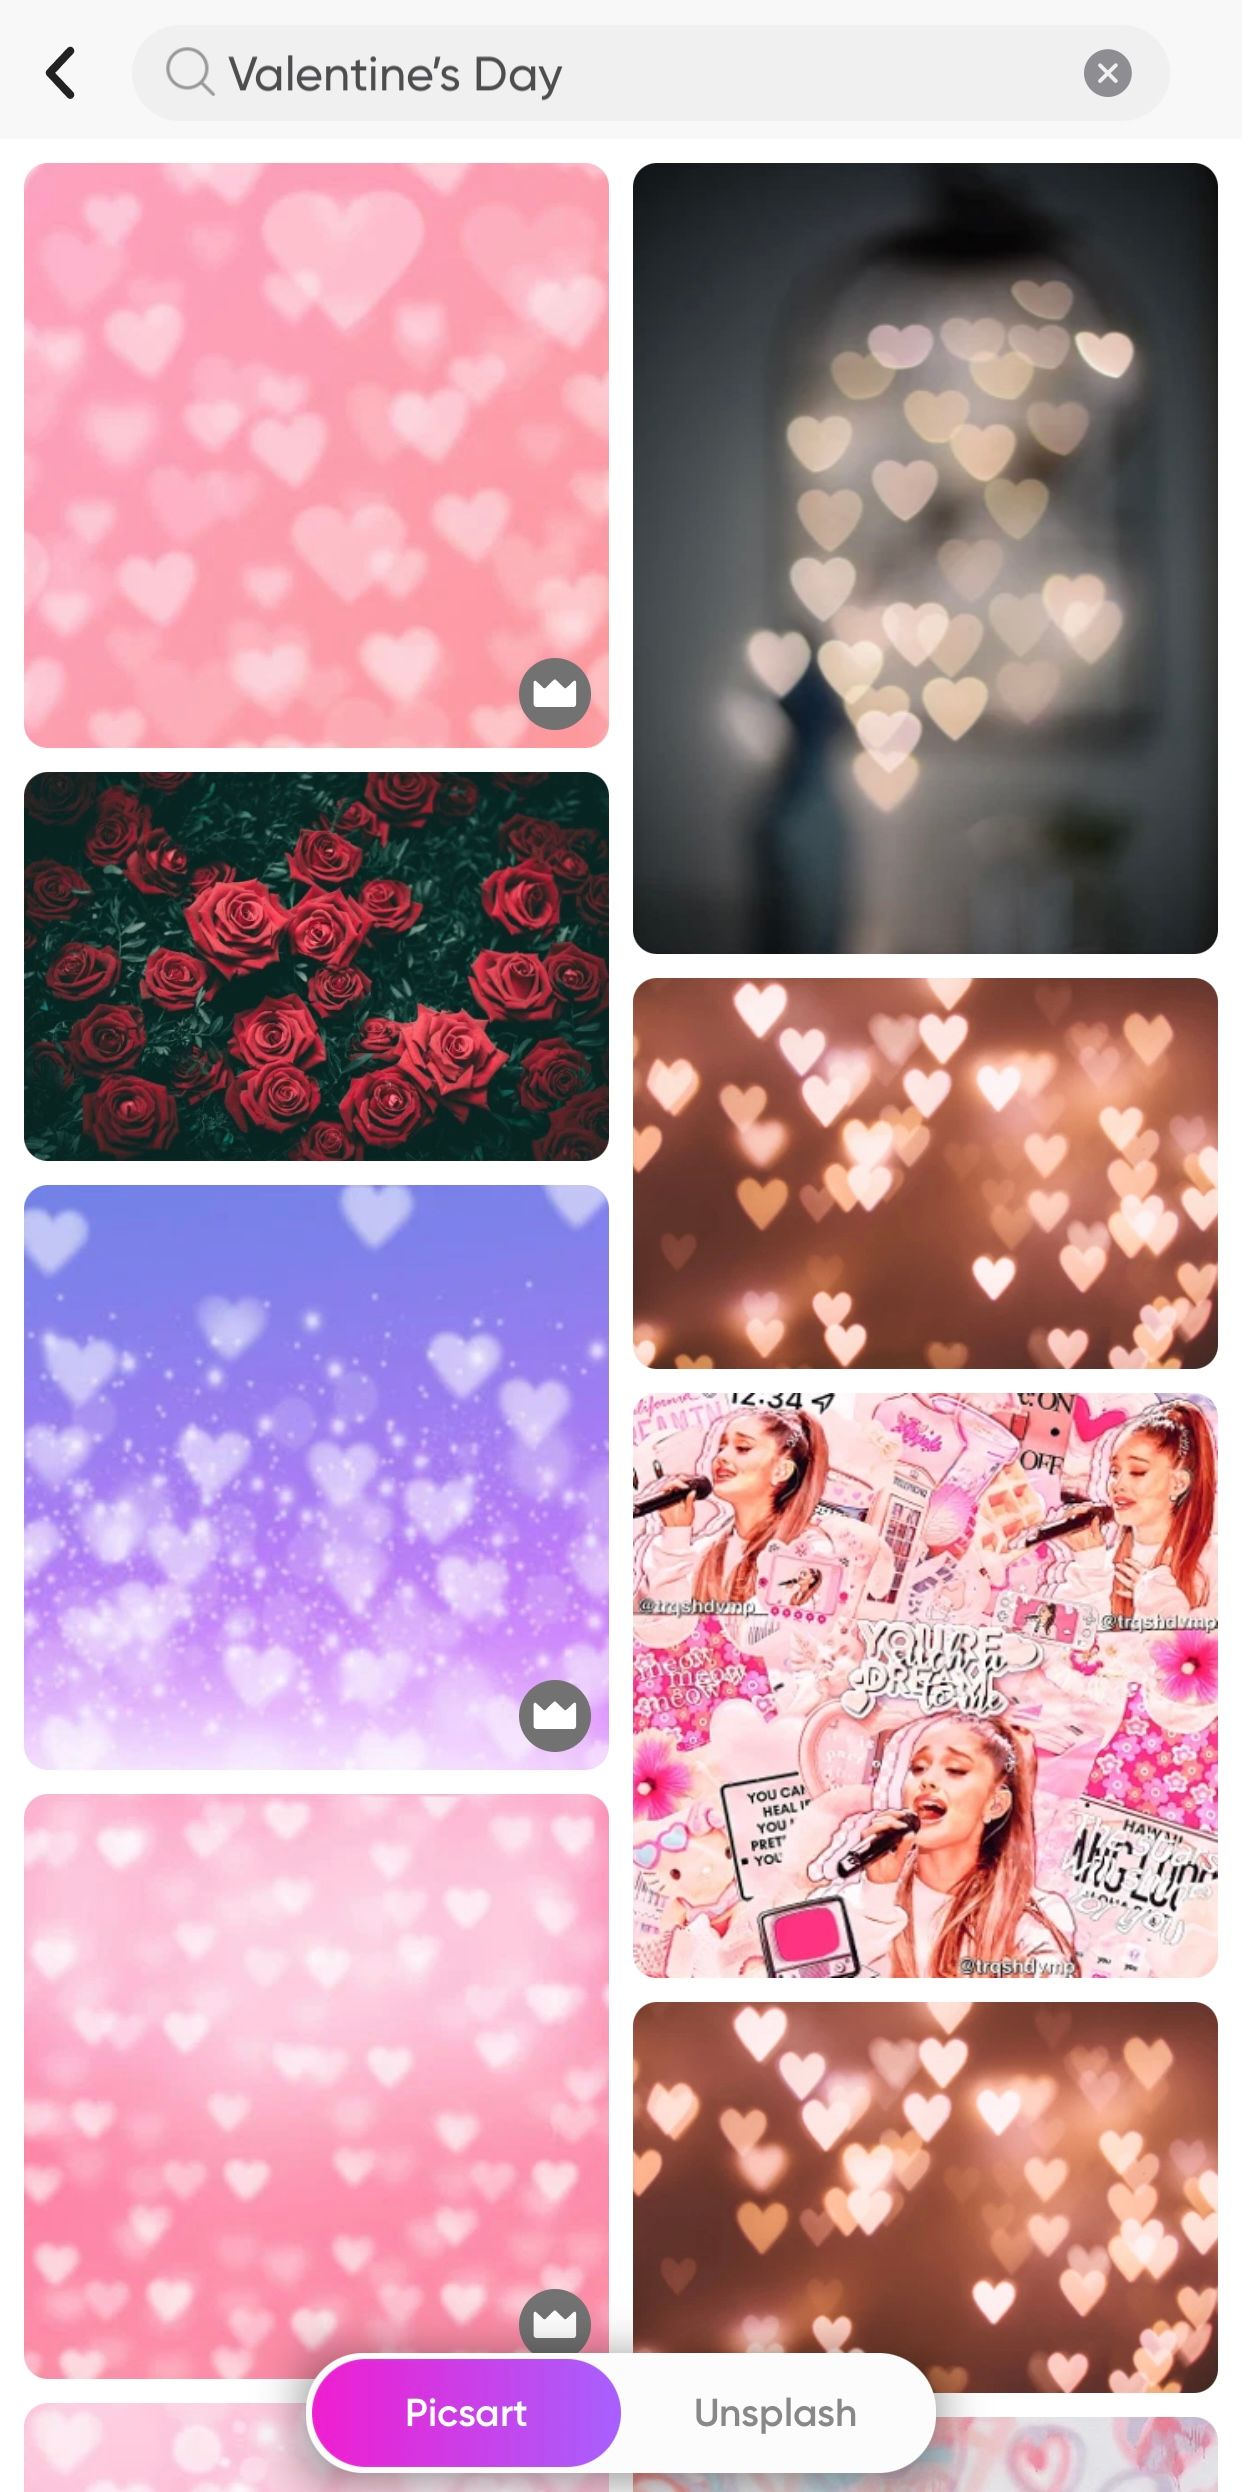 Variety of images representing Valentine's Day in Picsart gallery